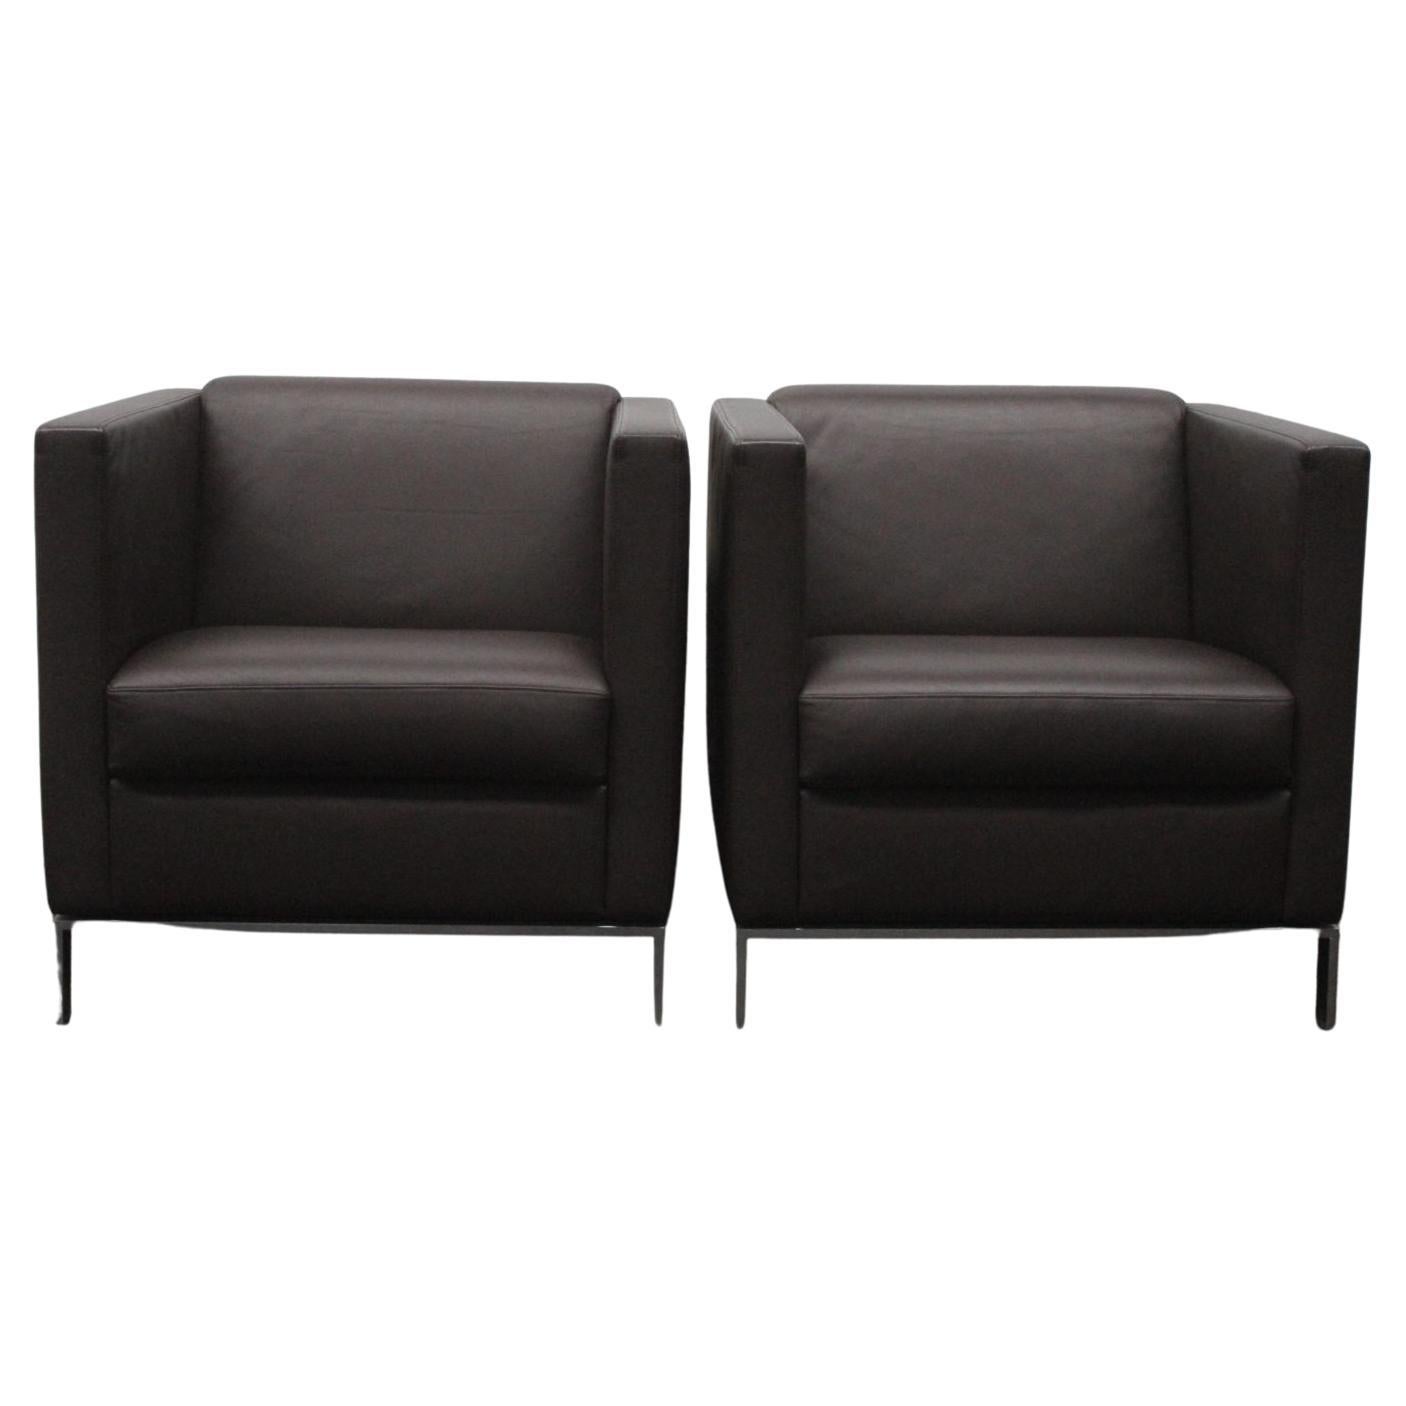 Pair of Walter Knoll “Foster 500.10” Armchairs – in Dark-Brown Leather For Sale